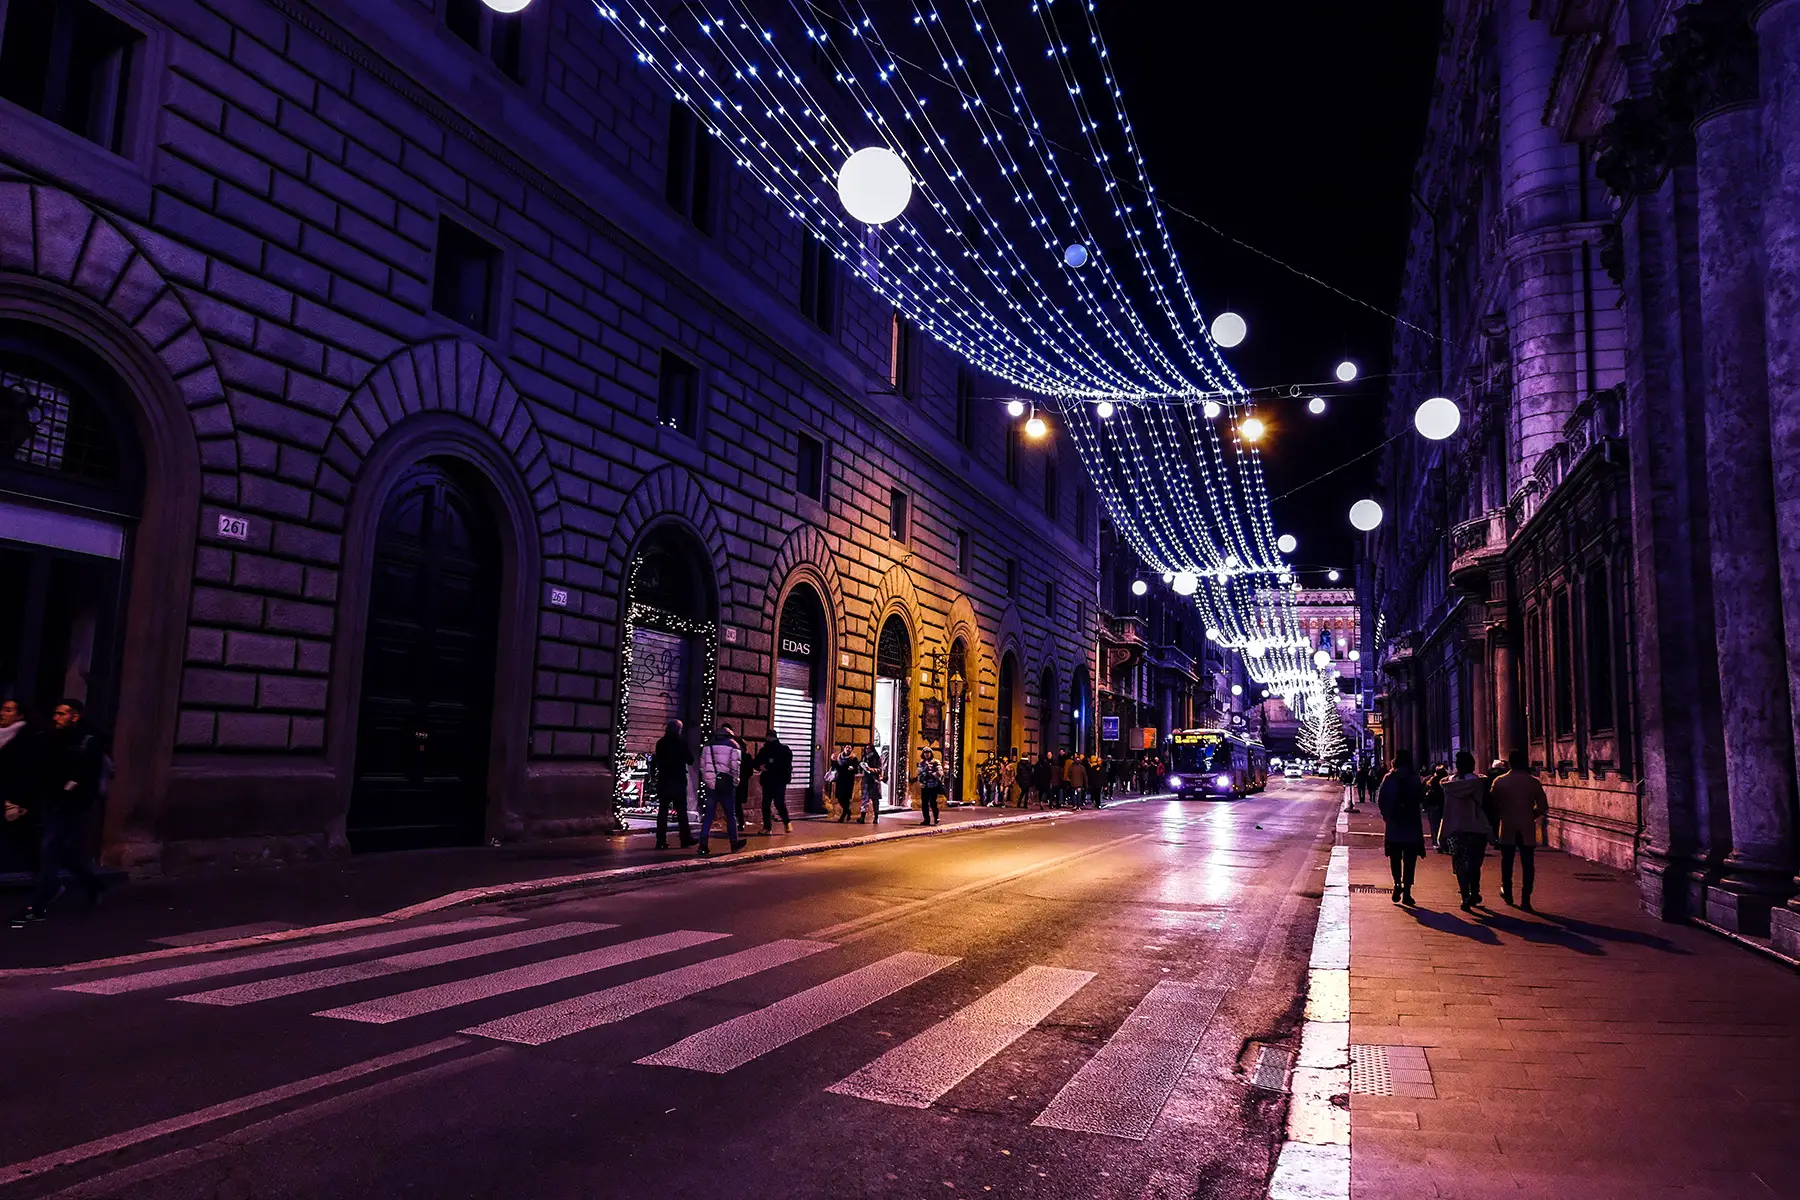 A street in Rome decorated for Christmas